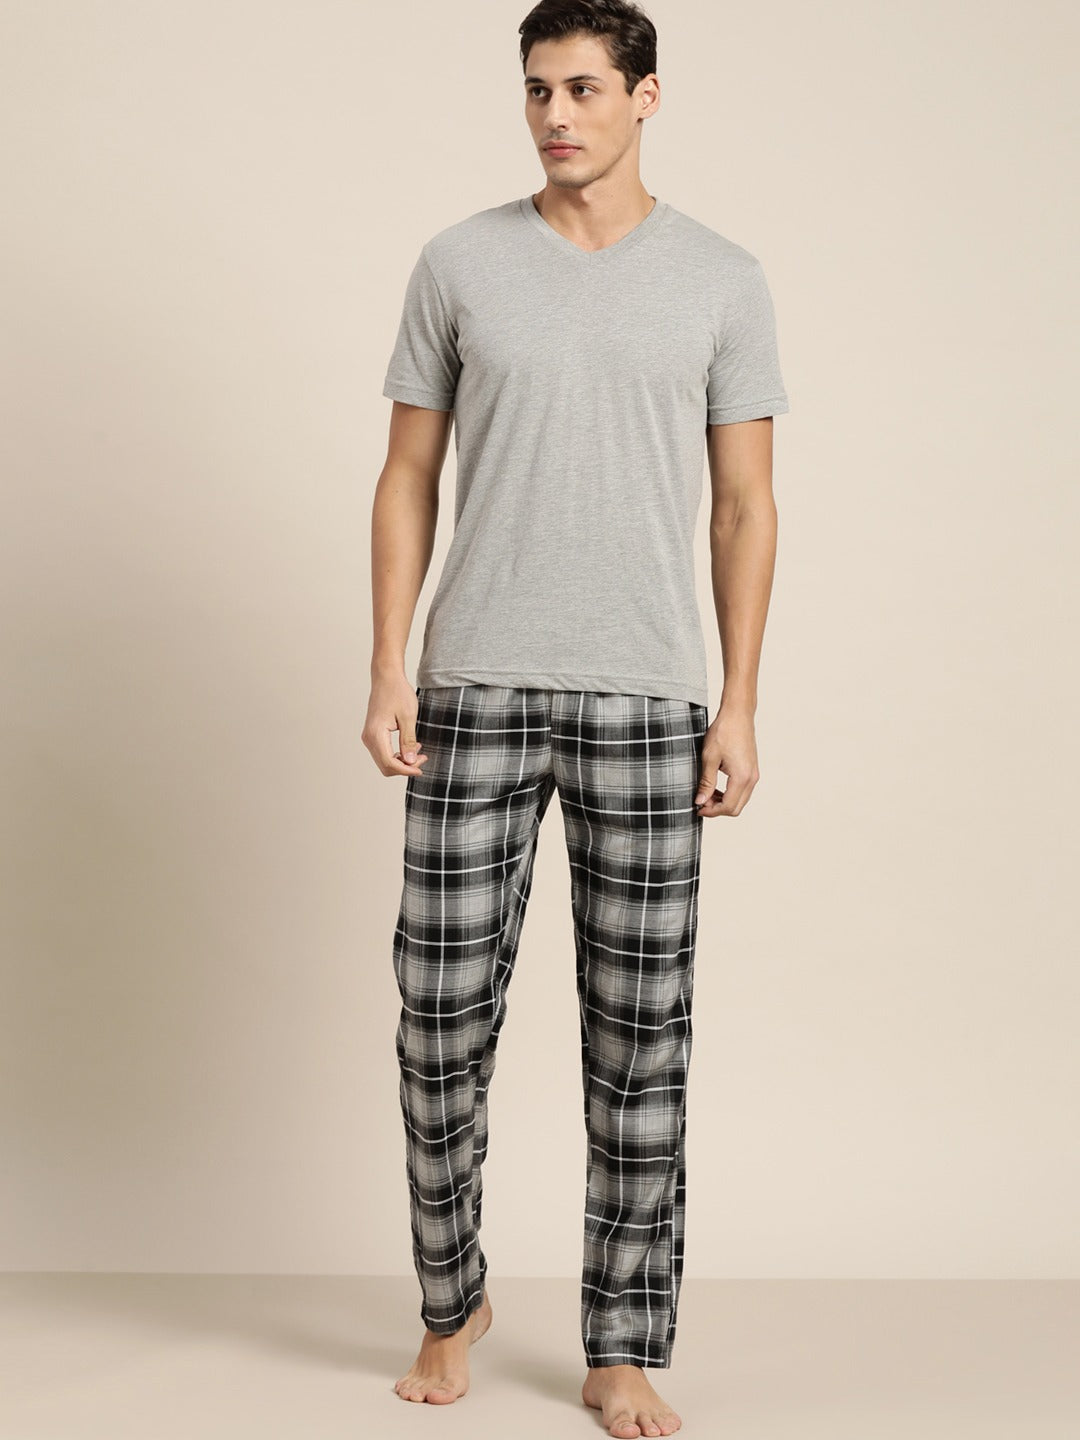 Men Black & Grey Checked Cotton Relaxed Fit Casual Lounge Pant